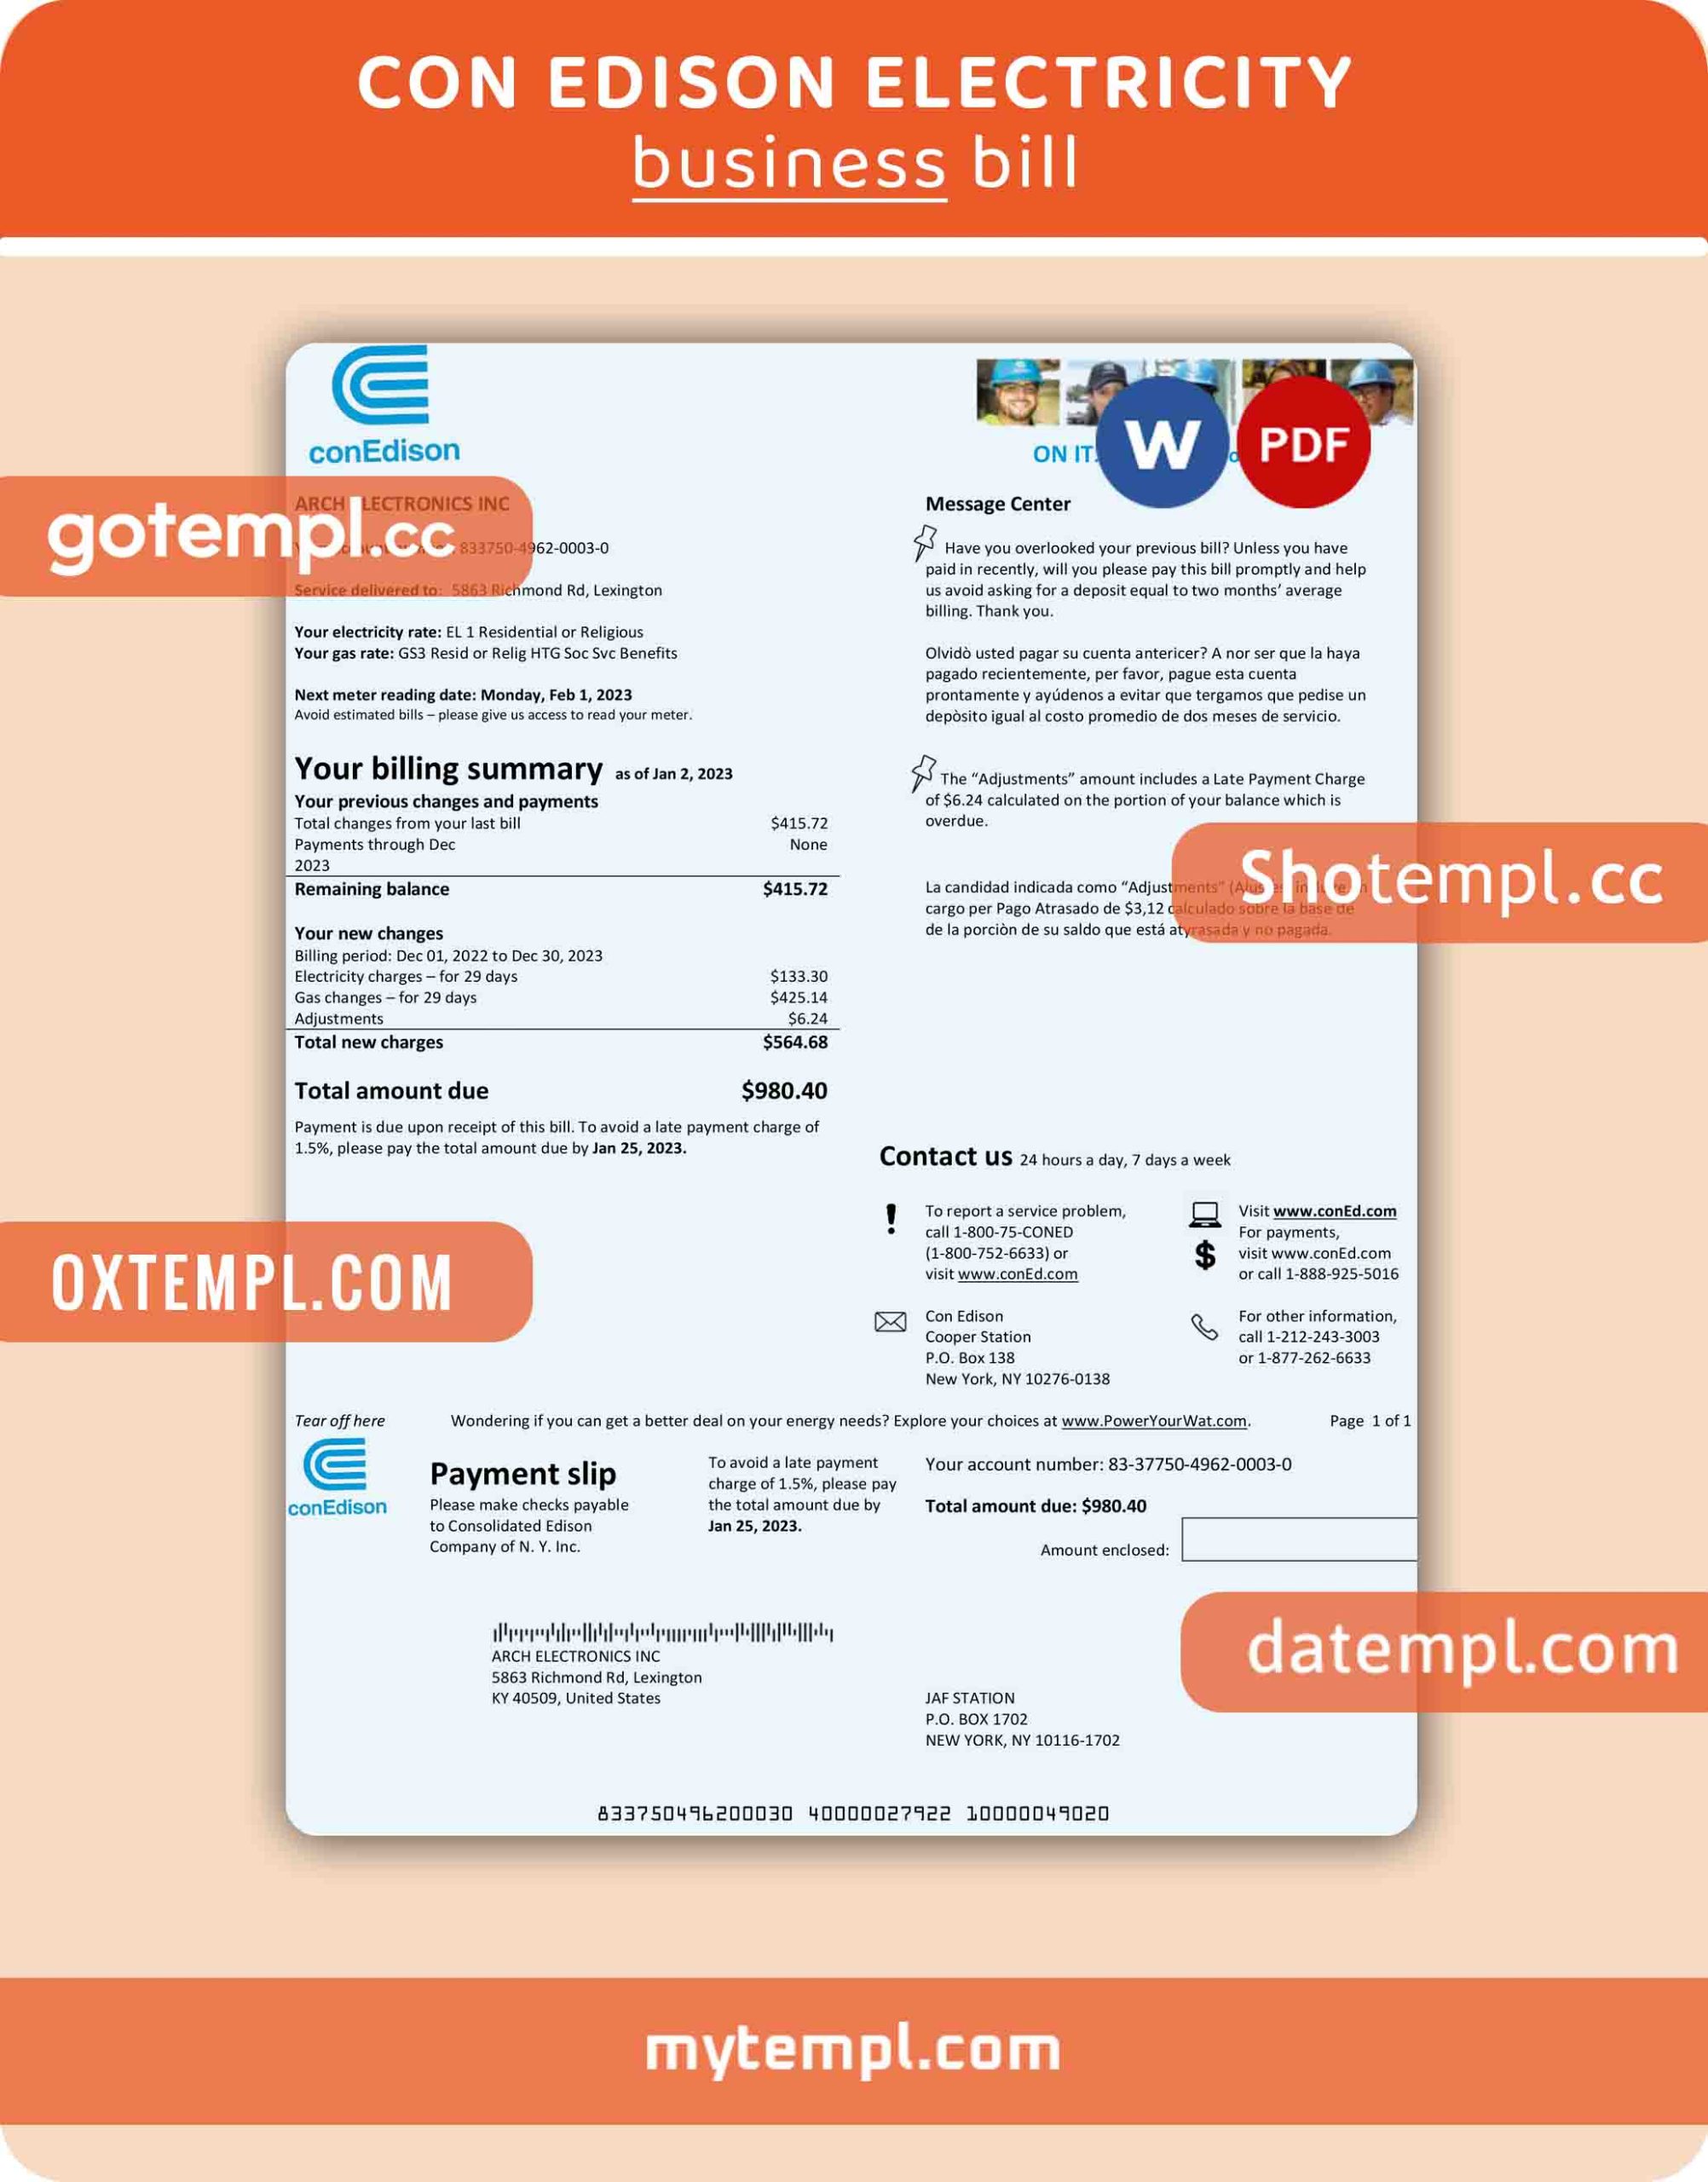 Con Edison electricity business utility bill, PDF and Word template